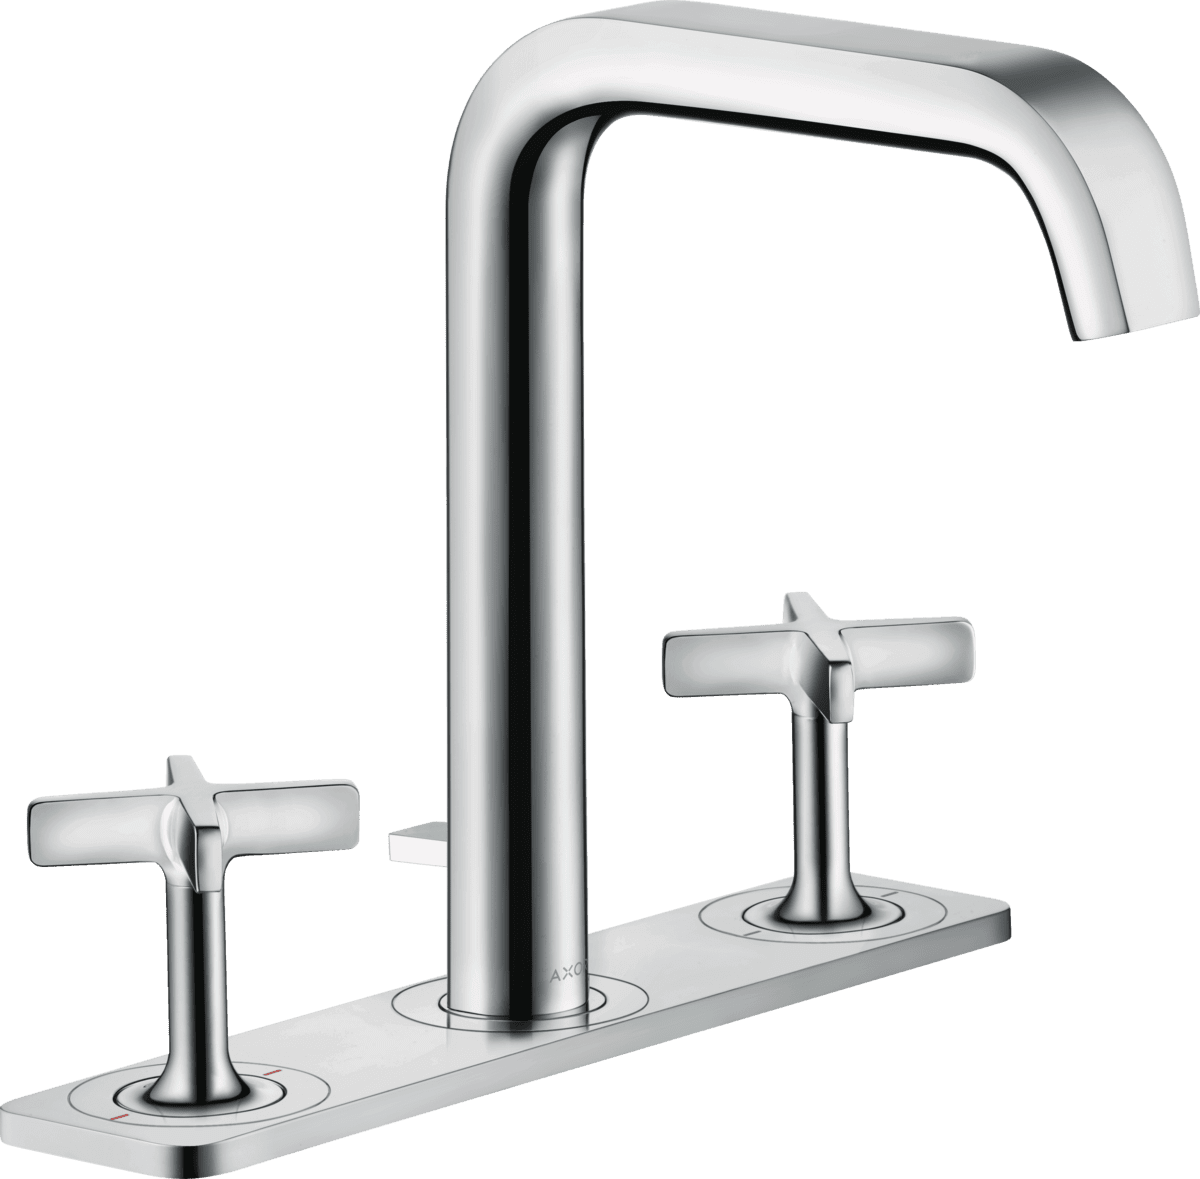 HANSGROHE AXOR Citterio E 3-hole basin mixer 170 with plate and pop-up waste set #36116800 - Stainless Steel Optic resmi